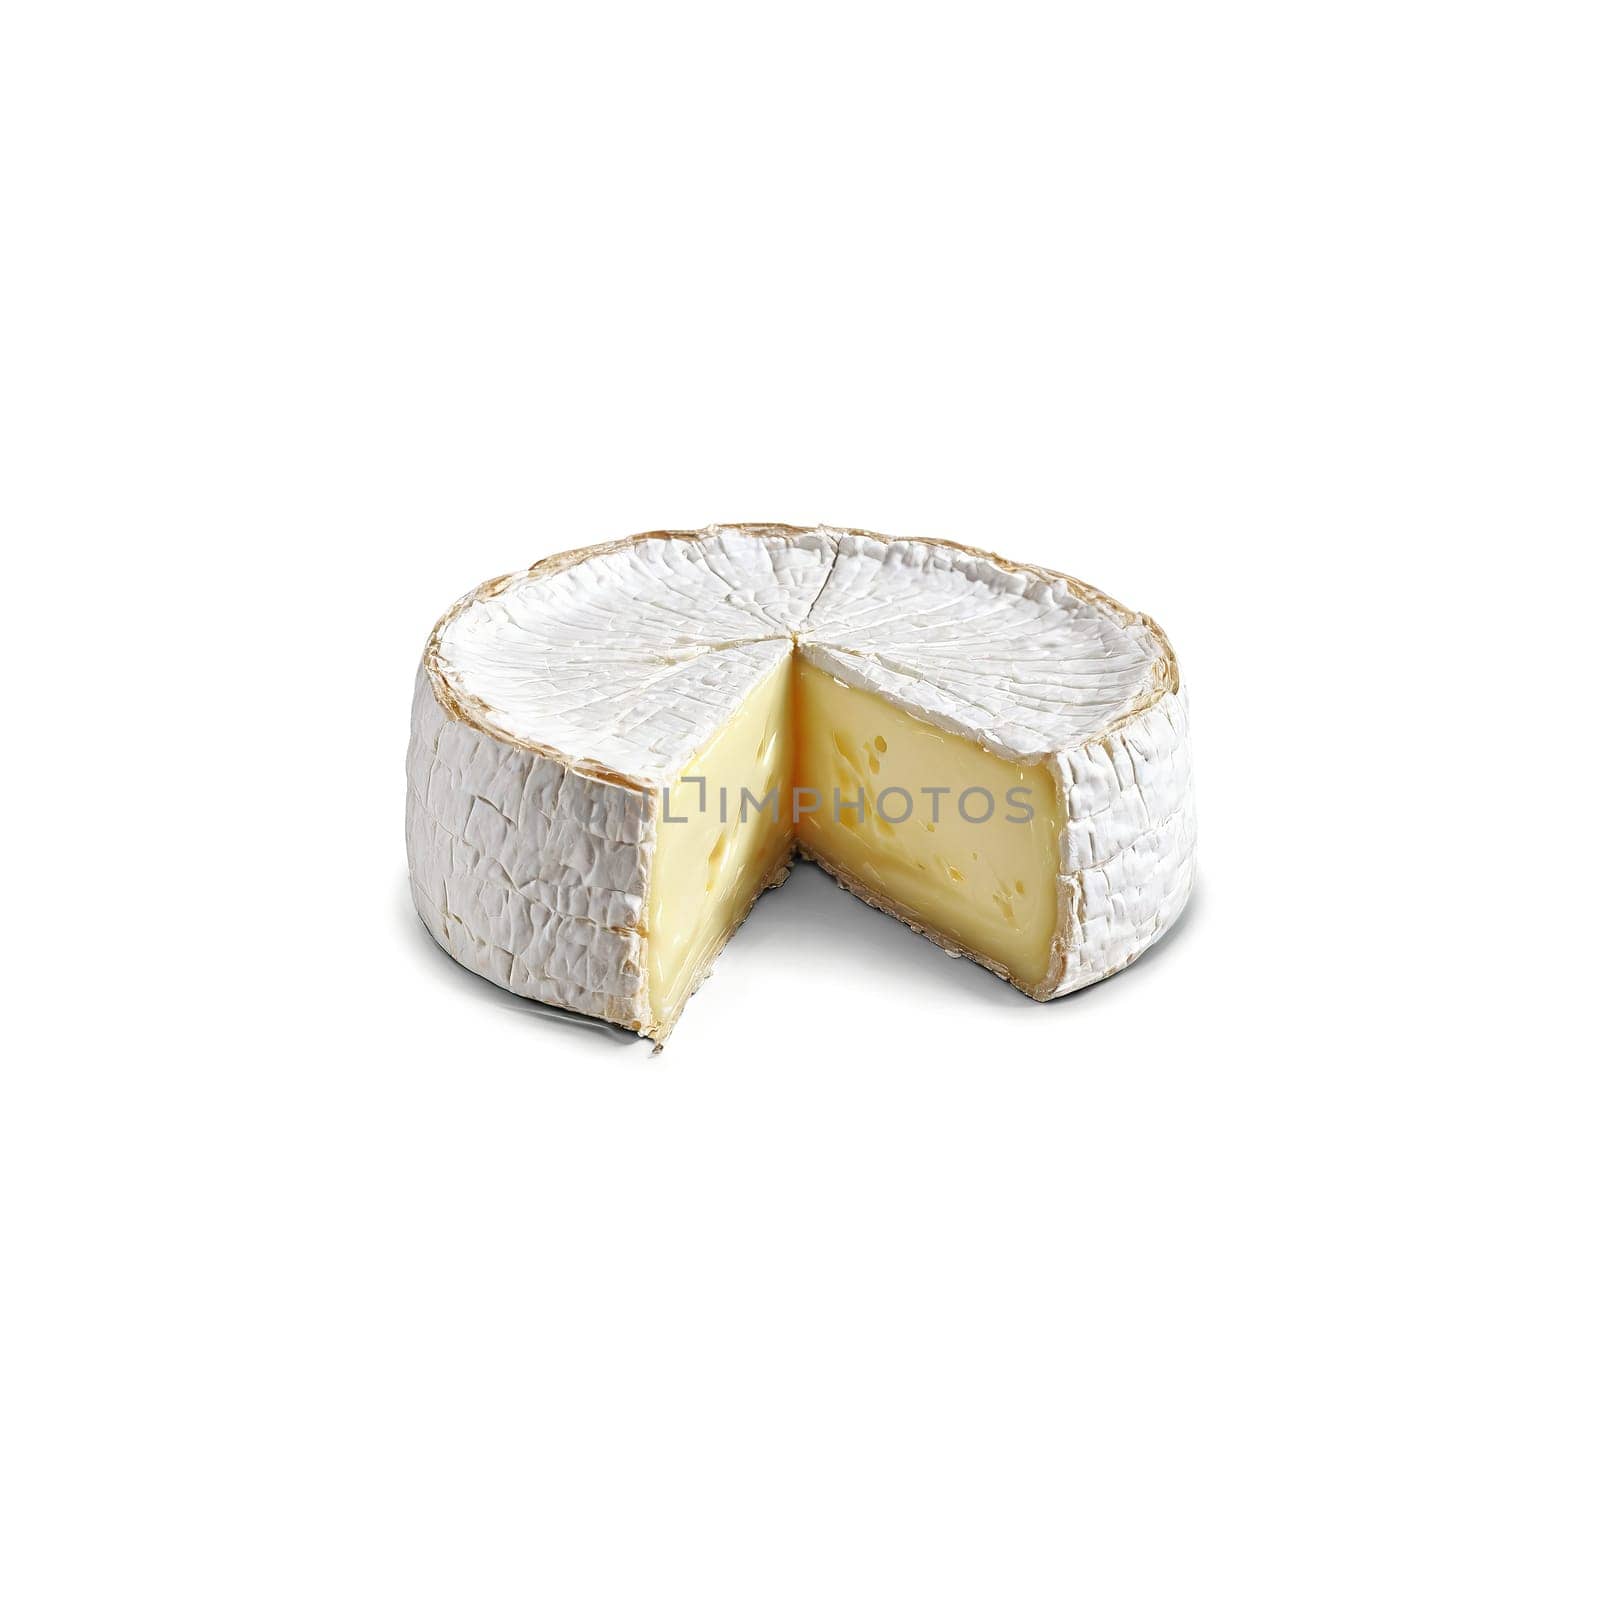 Camembert cheese wheel with cut wedge and gooey center oozing out Food and culinary concept by panophotograph